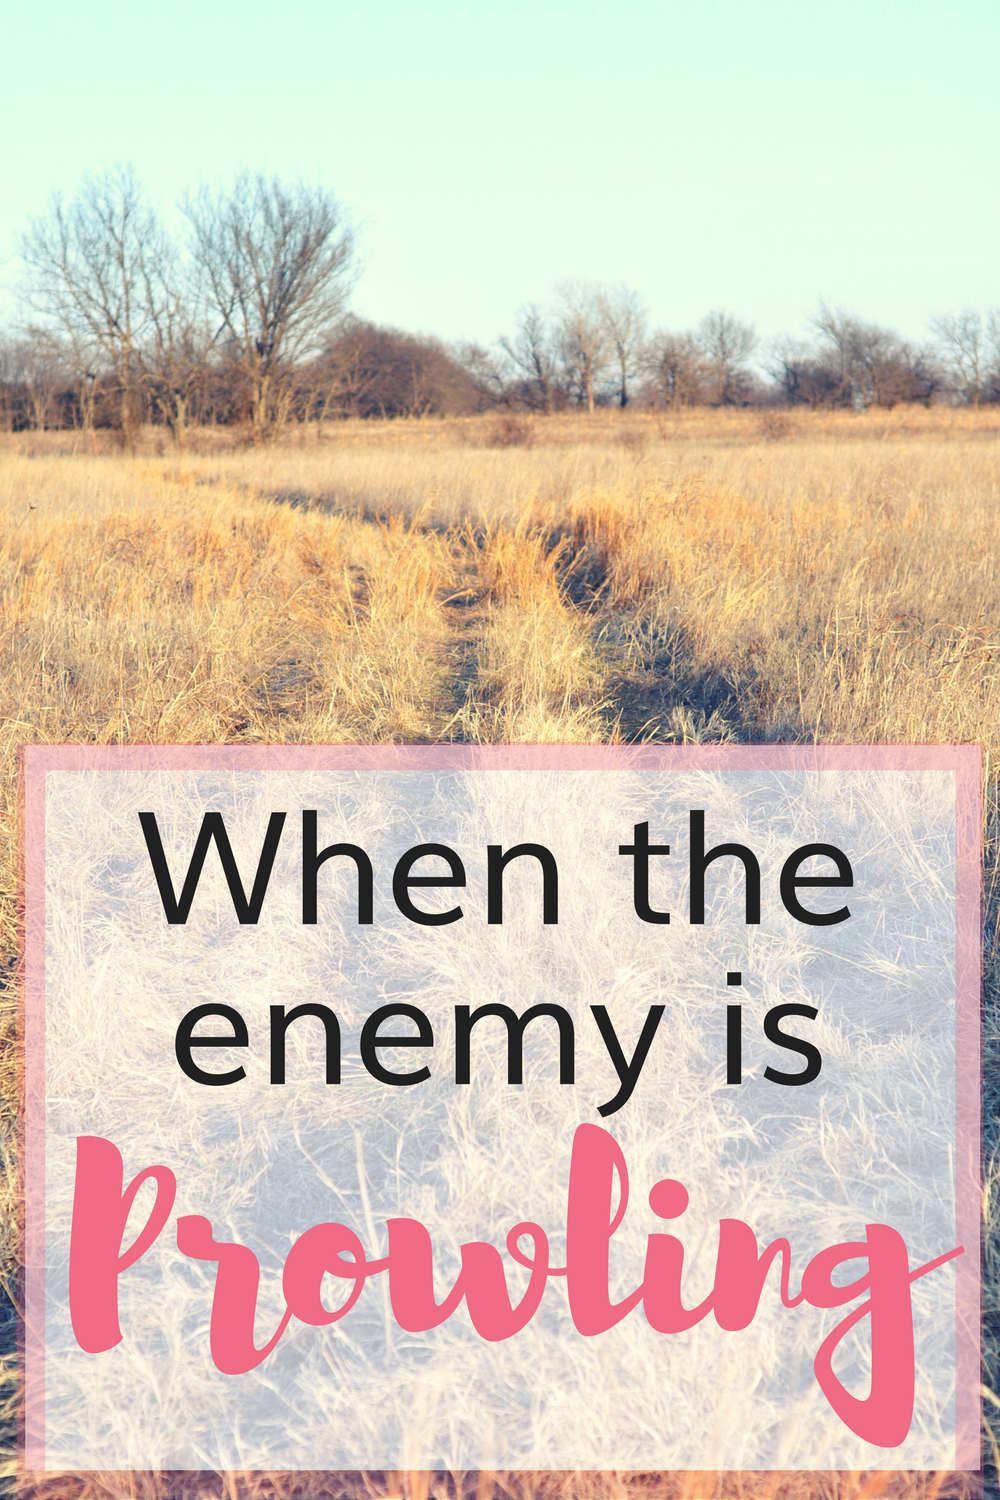 6 Things to Do When the Enemy is Prowling About